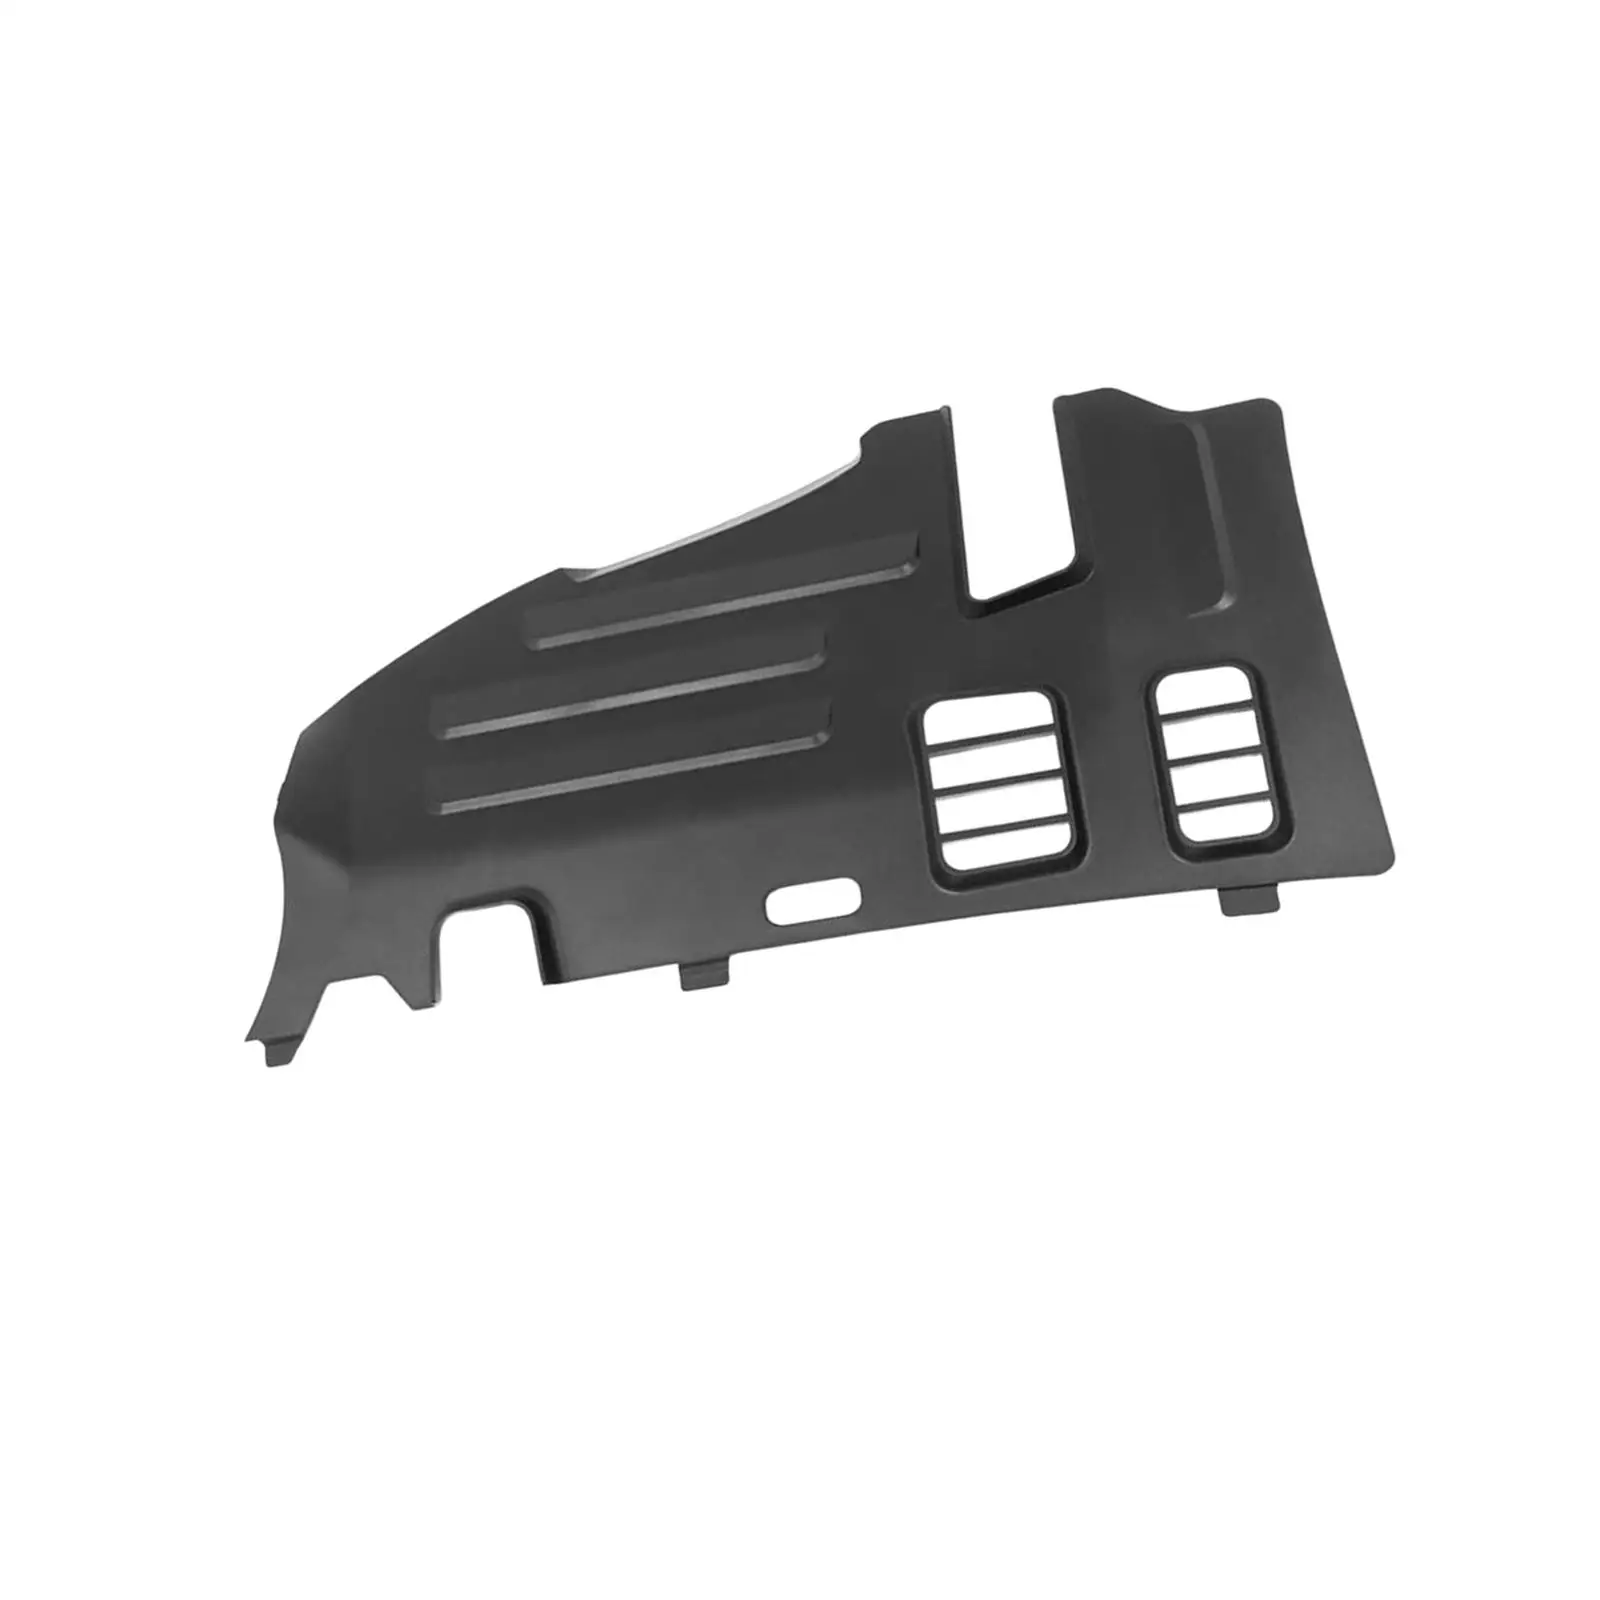 Driver Anti Kick Panel Cover Trim for Byd Yuan Plus High Performance